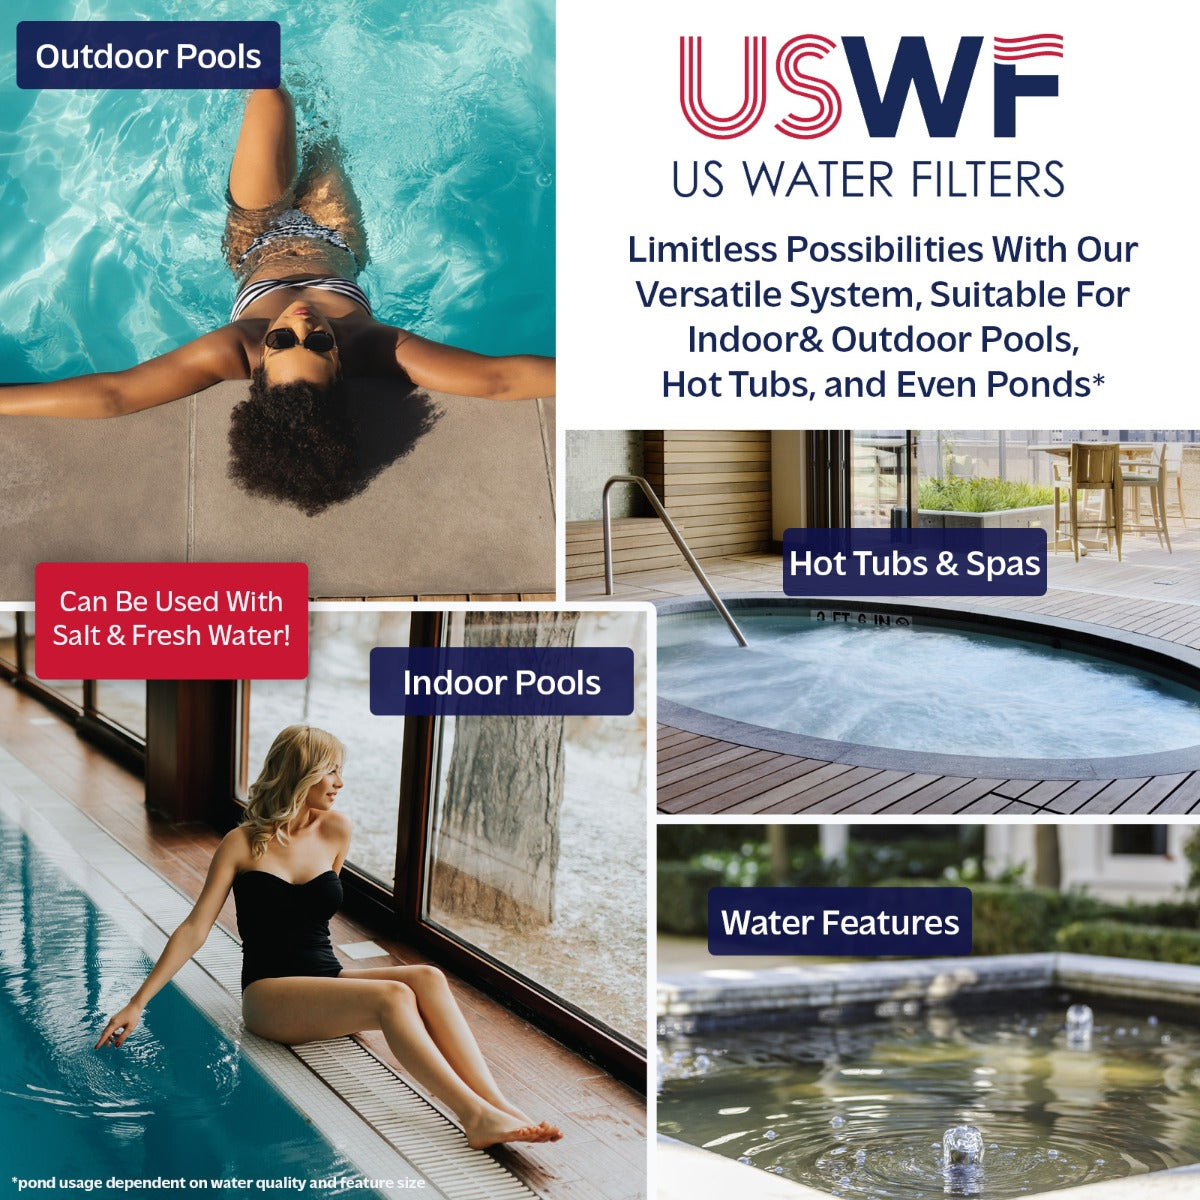 USWF RL950HO Replacement UV Lamp | Fits US Water Filters H4-PL Pool UV System